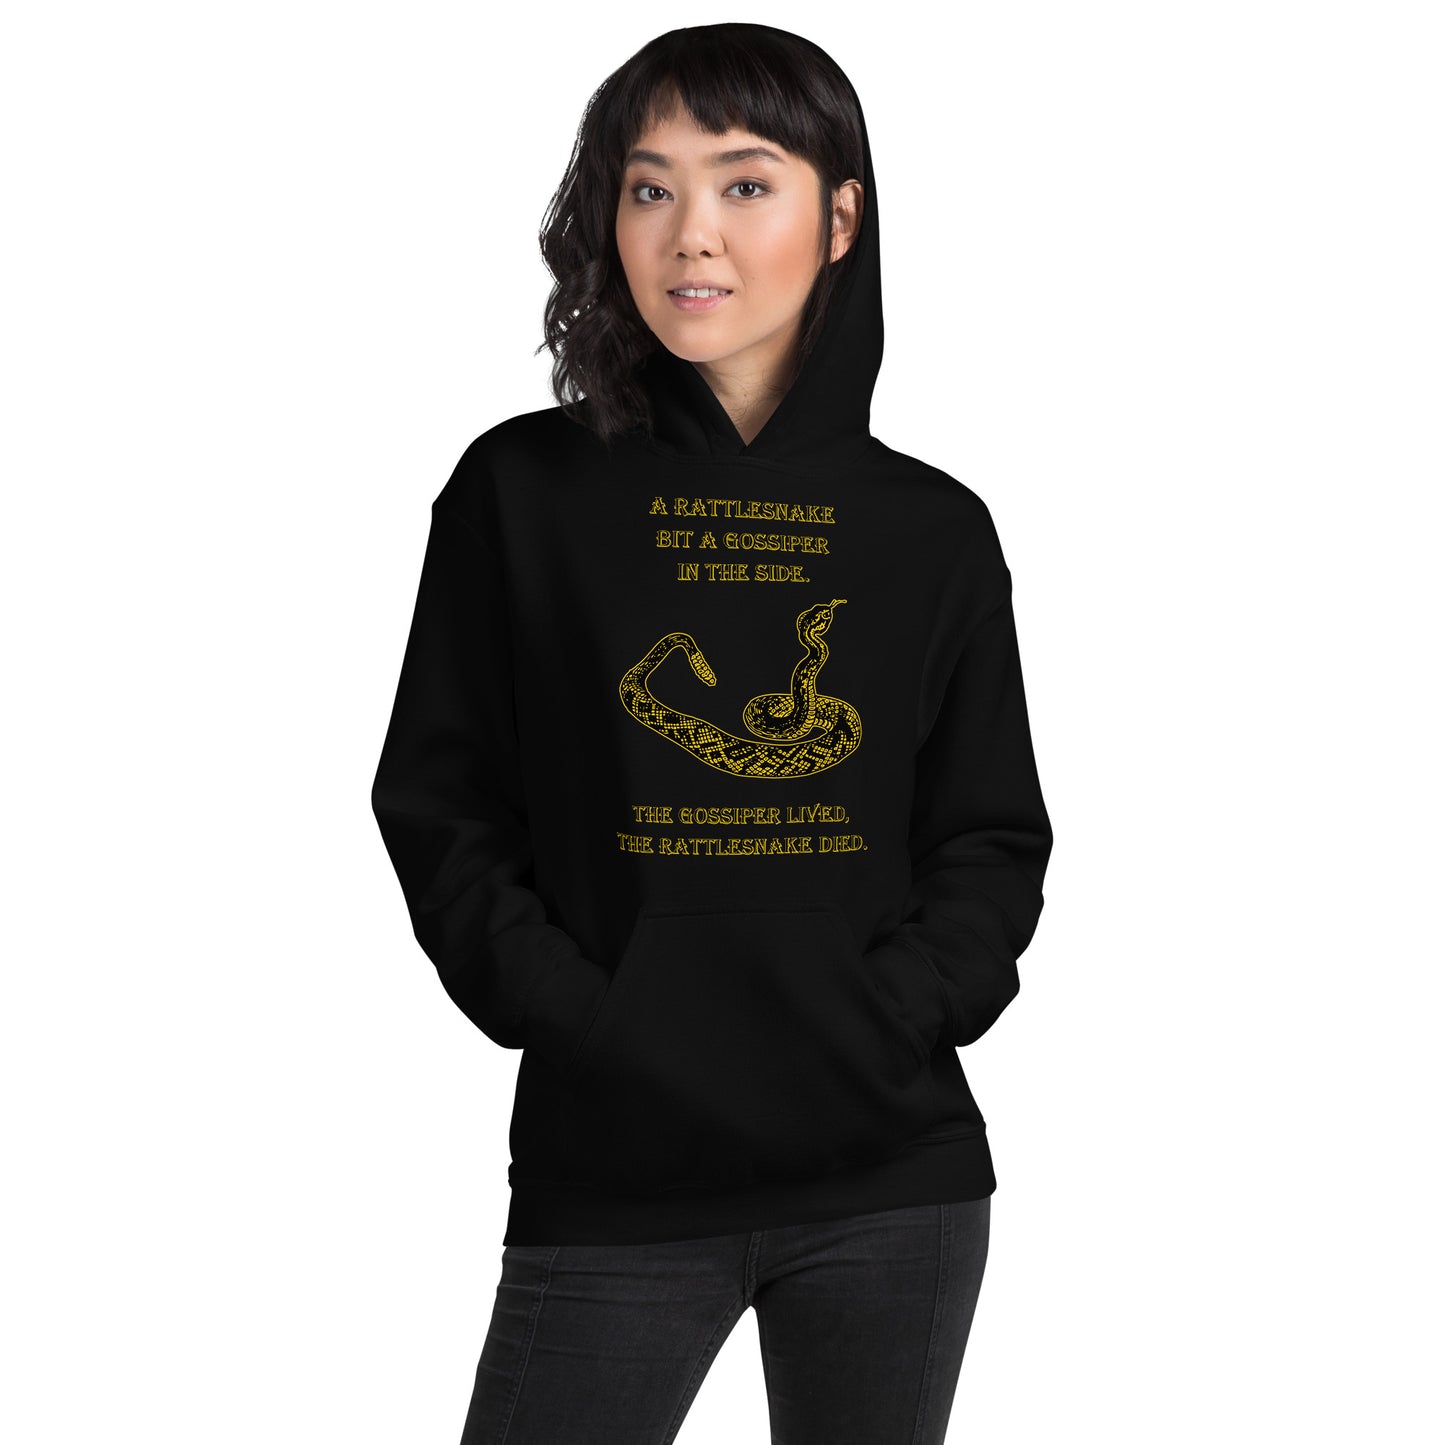 A010 Hoodie – Gildan 18500 Unisex Hoodie Featuring a Rattlesnake Graphic and the Text “A Rattlesnake Bit a Gossiper in the Side – The Gossiper Lived, The Rattlesnake Died.”